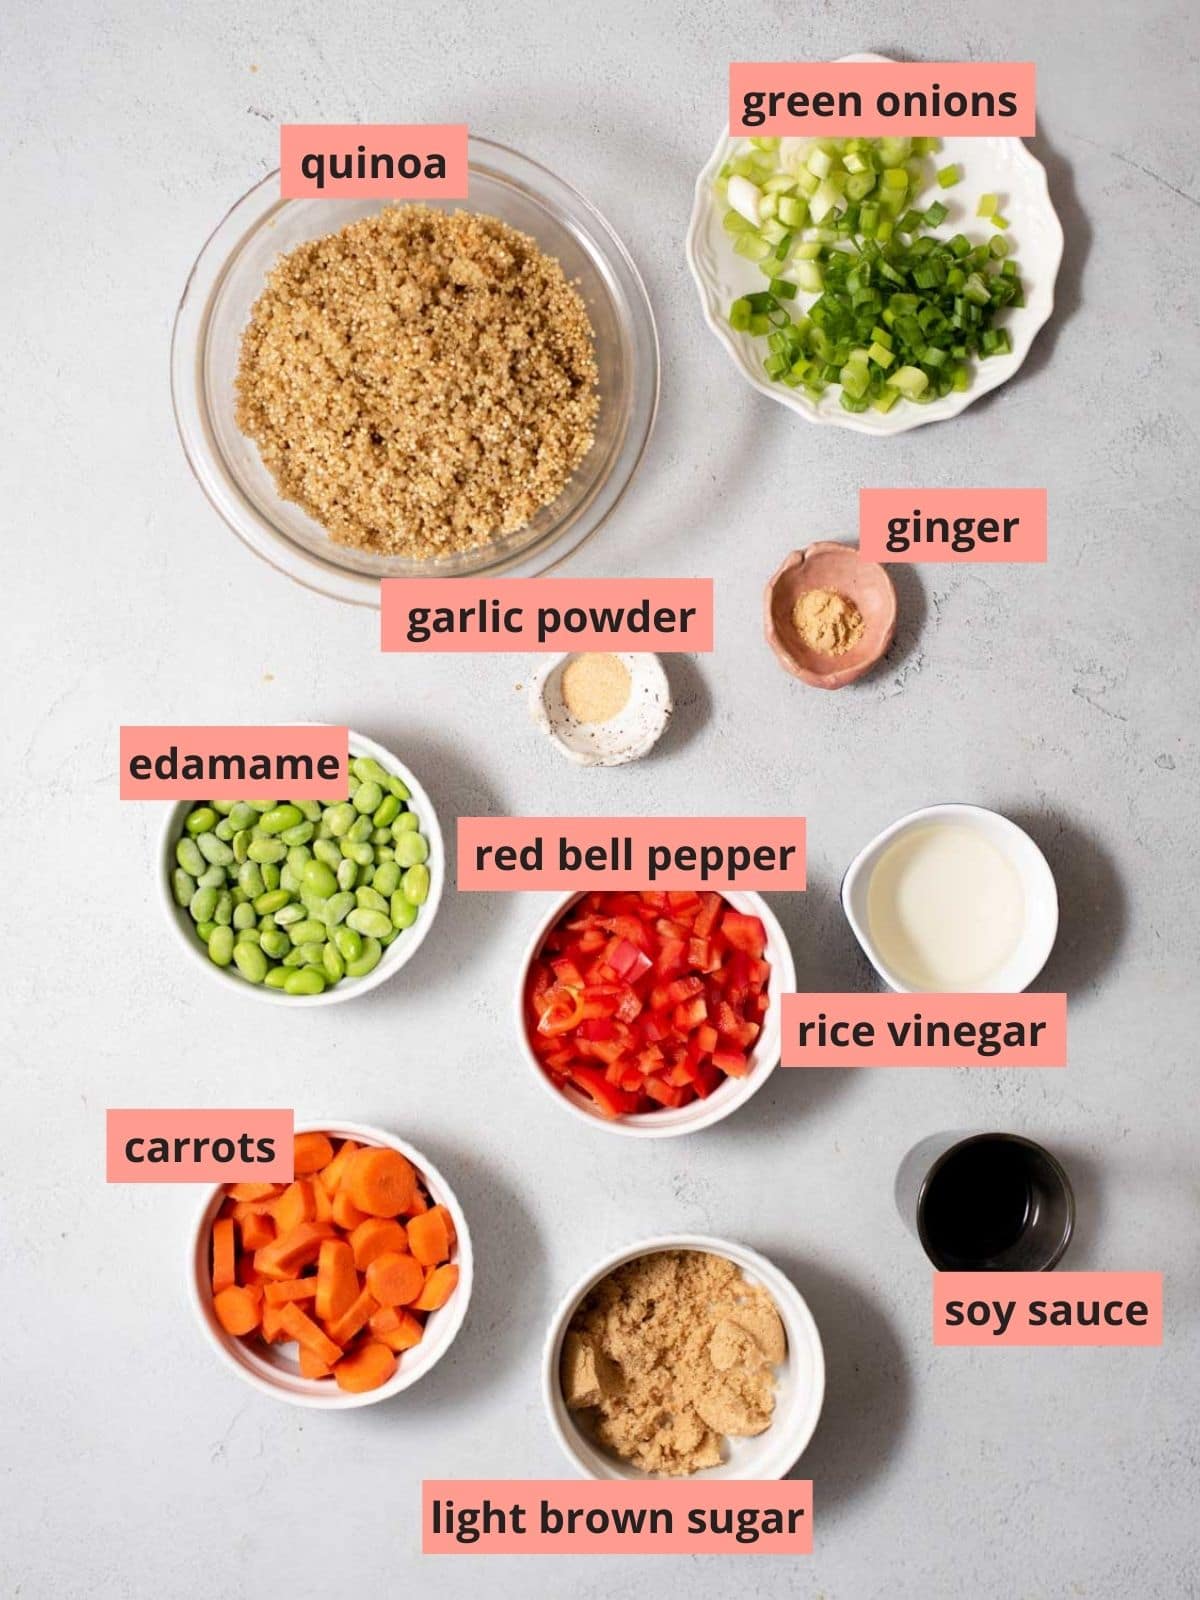 Labeled ingredients used to make quinoa fried rice.